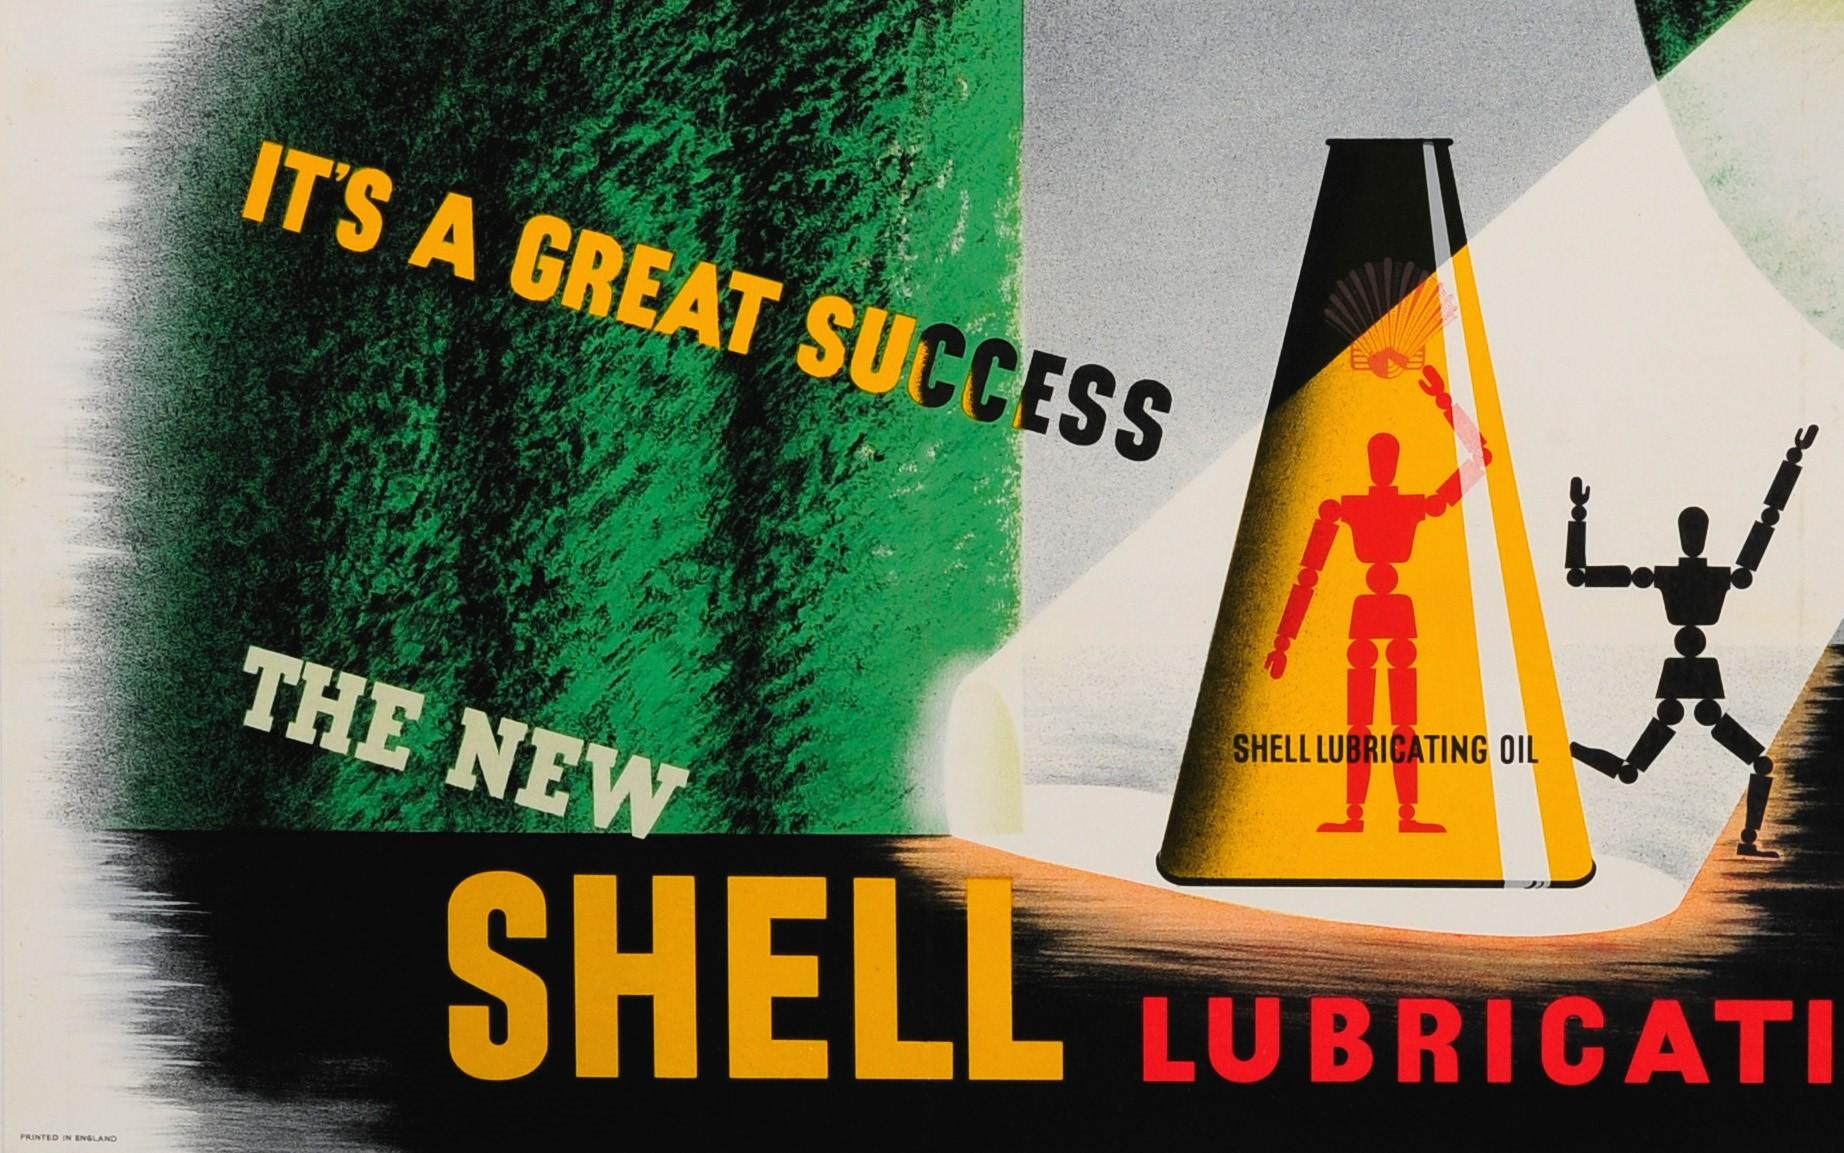 Original vintage advertising poster for The New Shell Lubricating Oil It's A Great Success - featuring a fun design by the notable artist Edward McKnight Kauffer (1890-1954) of a silhouette of the artist mannequin on the front of the Shell oil can